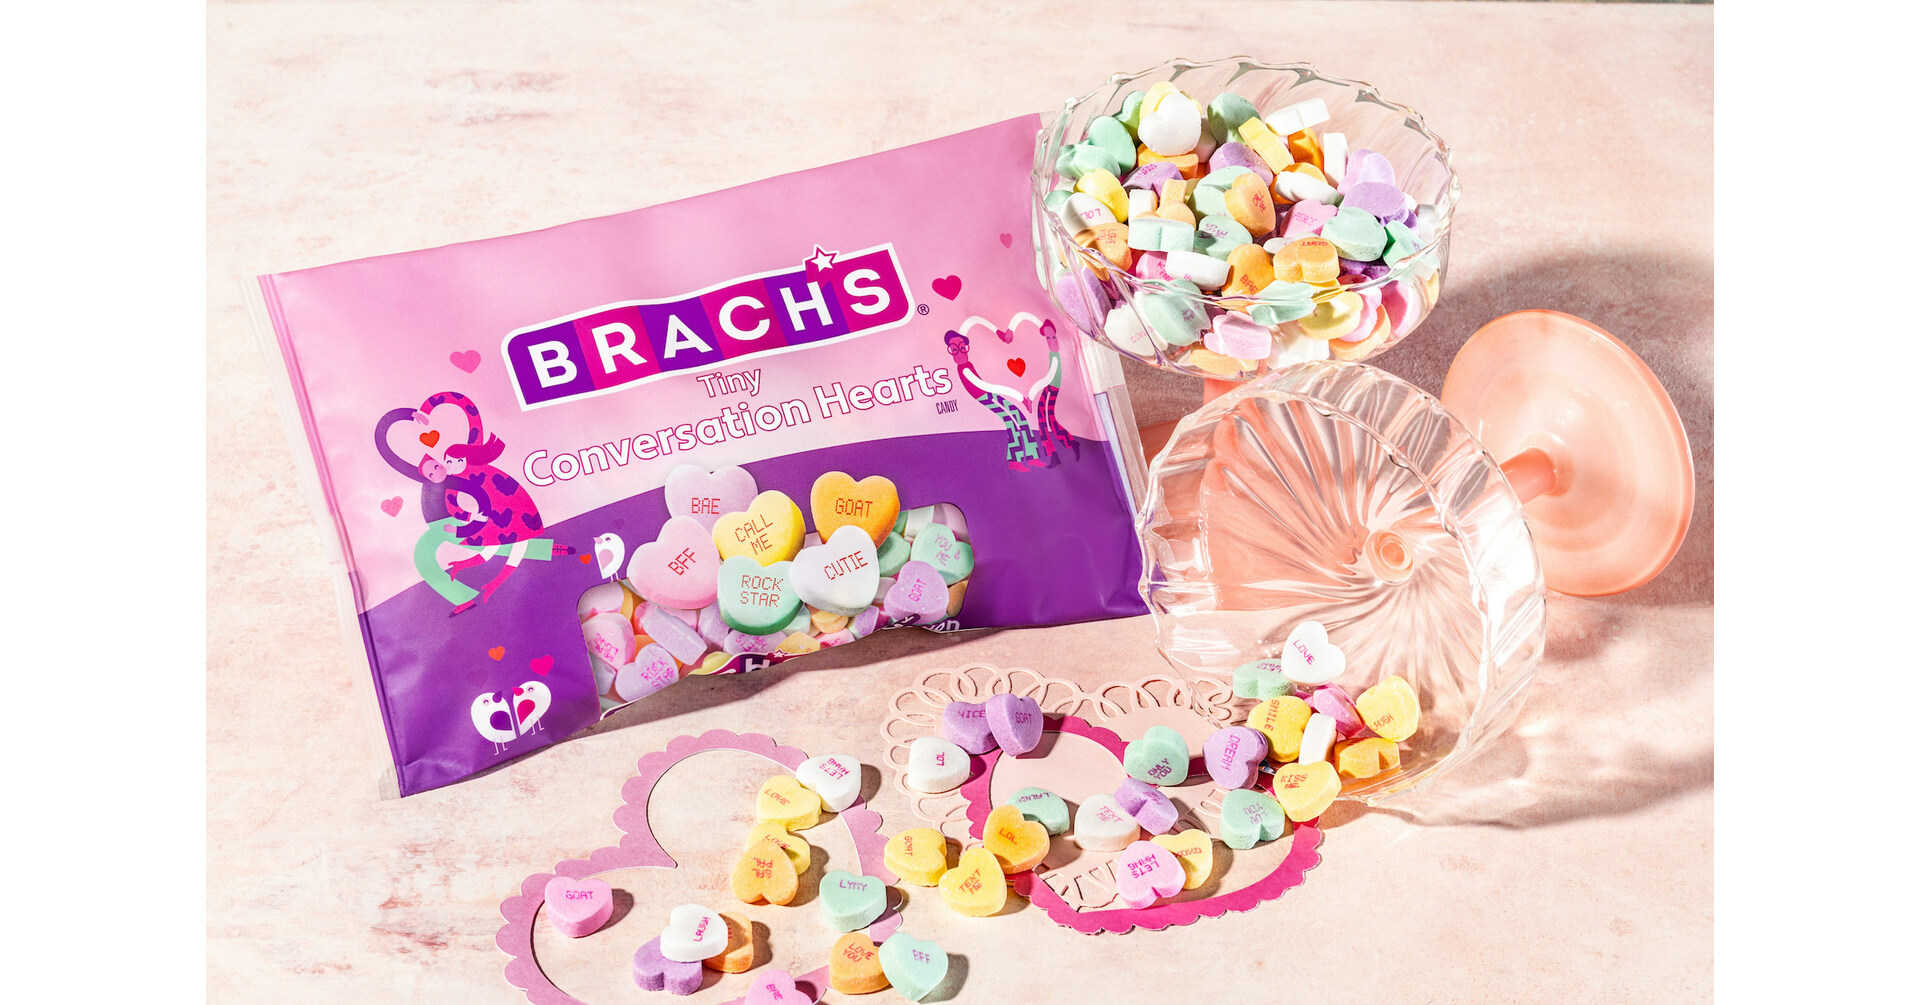 I Love The 80's - Who remembers these delicious Brachs